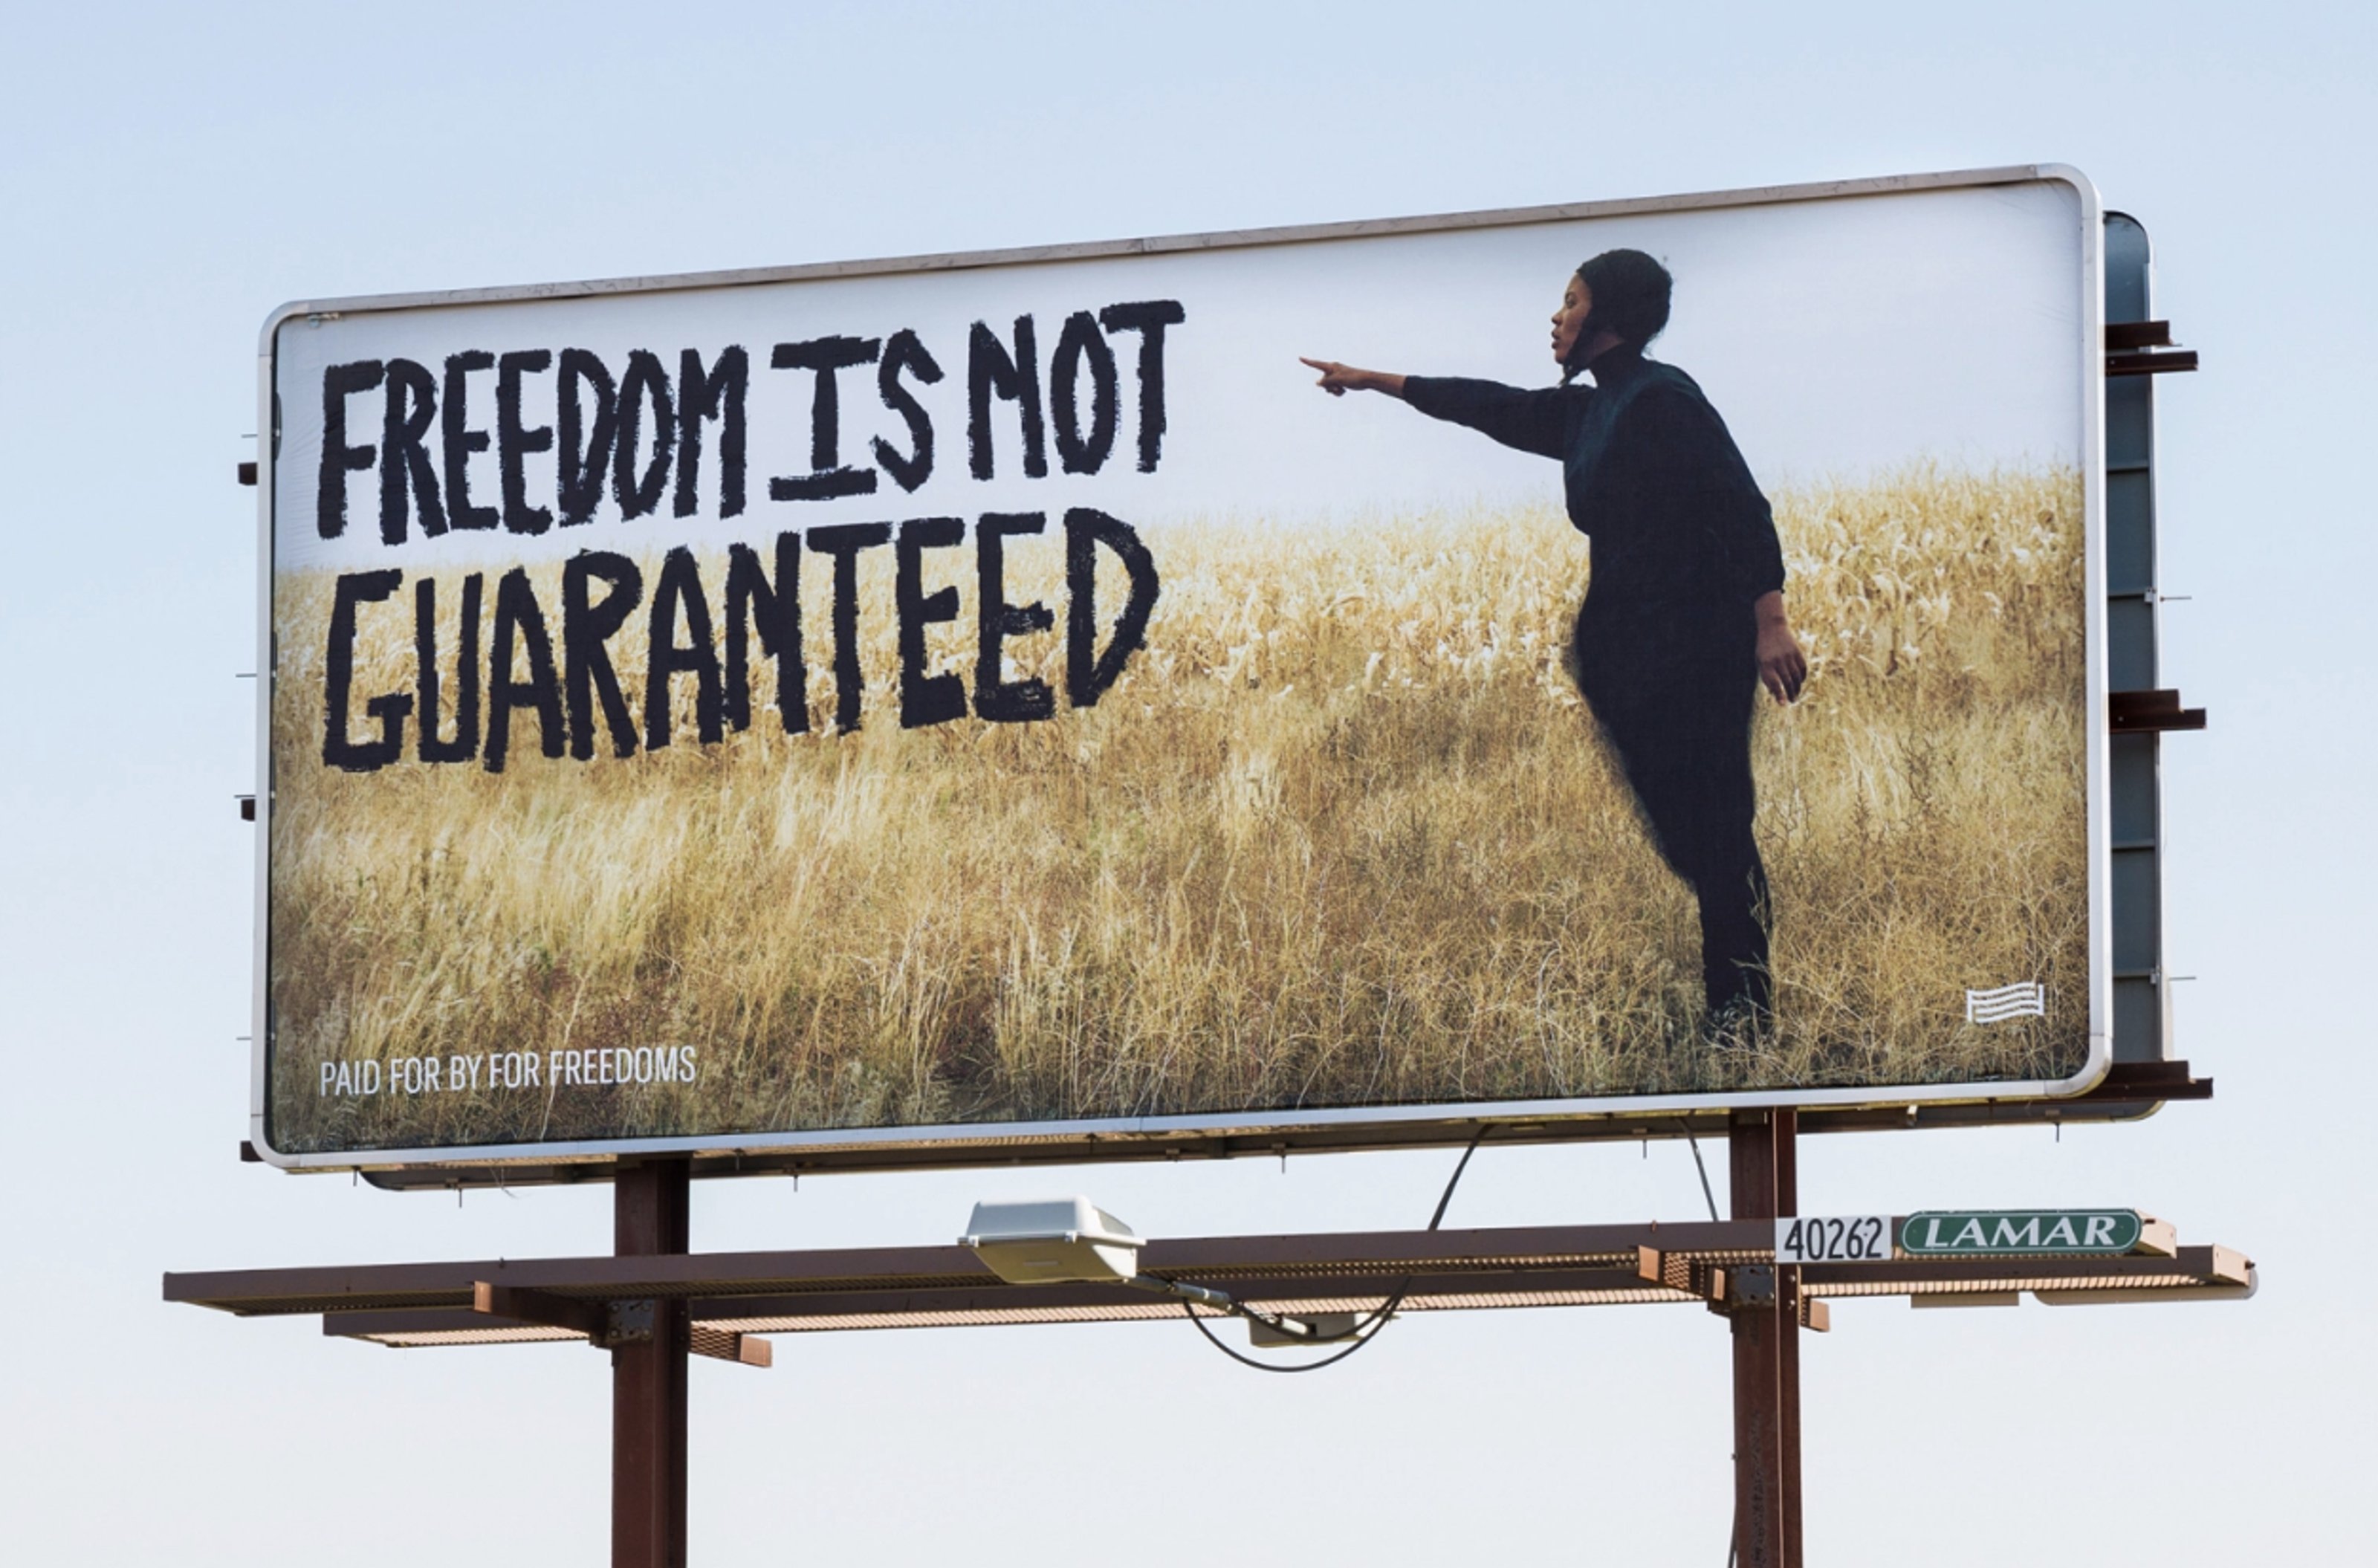 Xaviera Simmons’s 2018 billboard for For Freedoms.